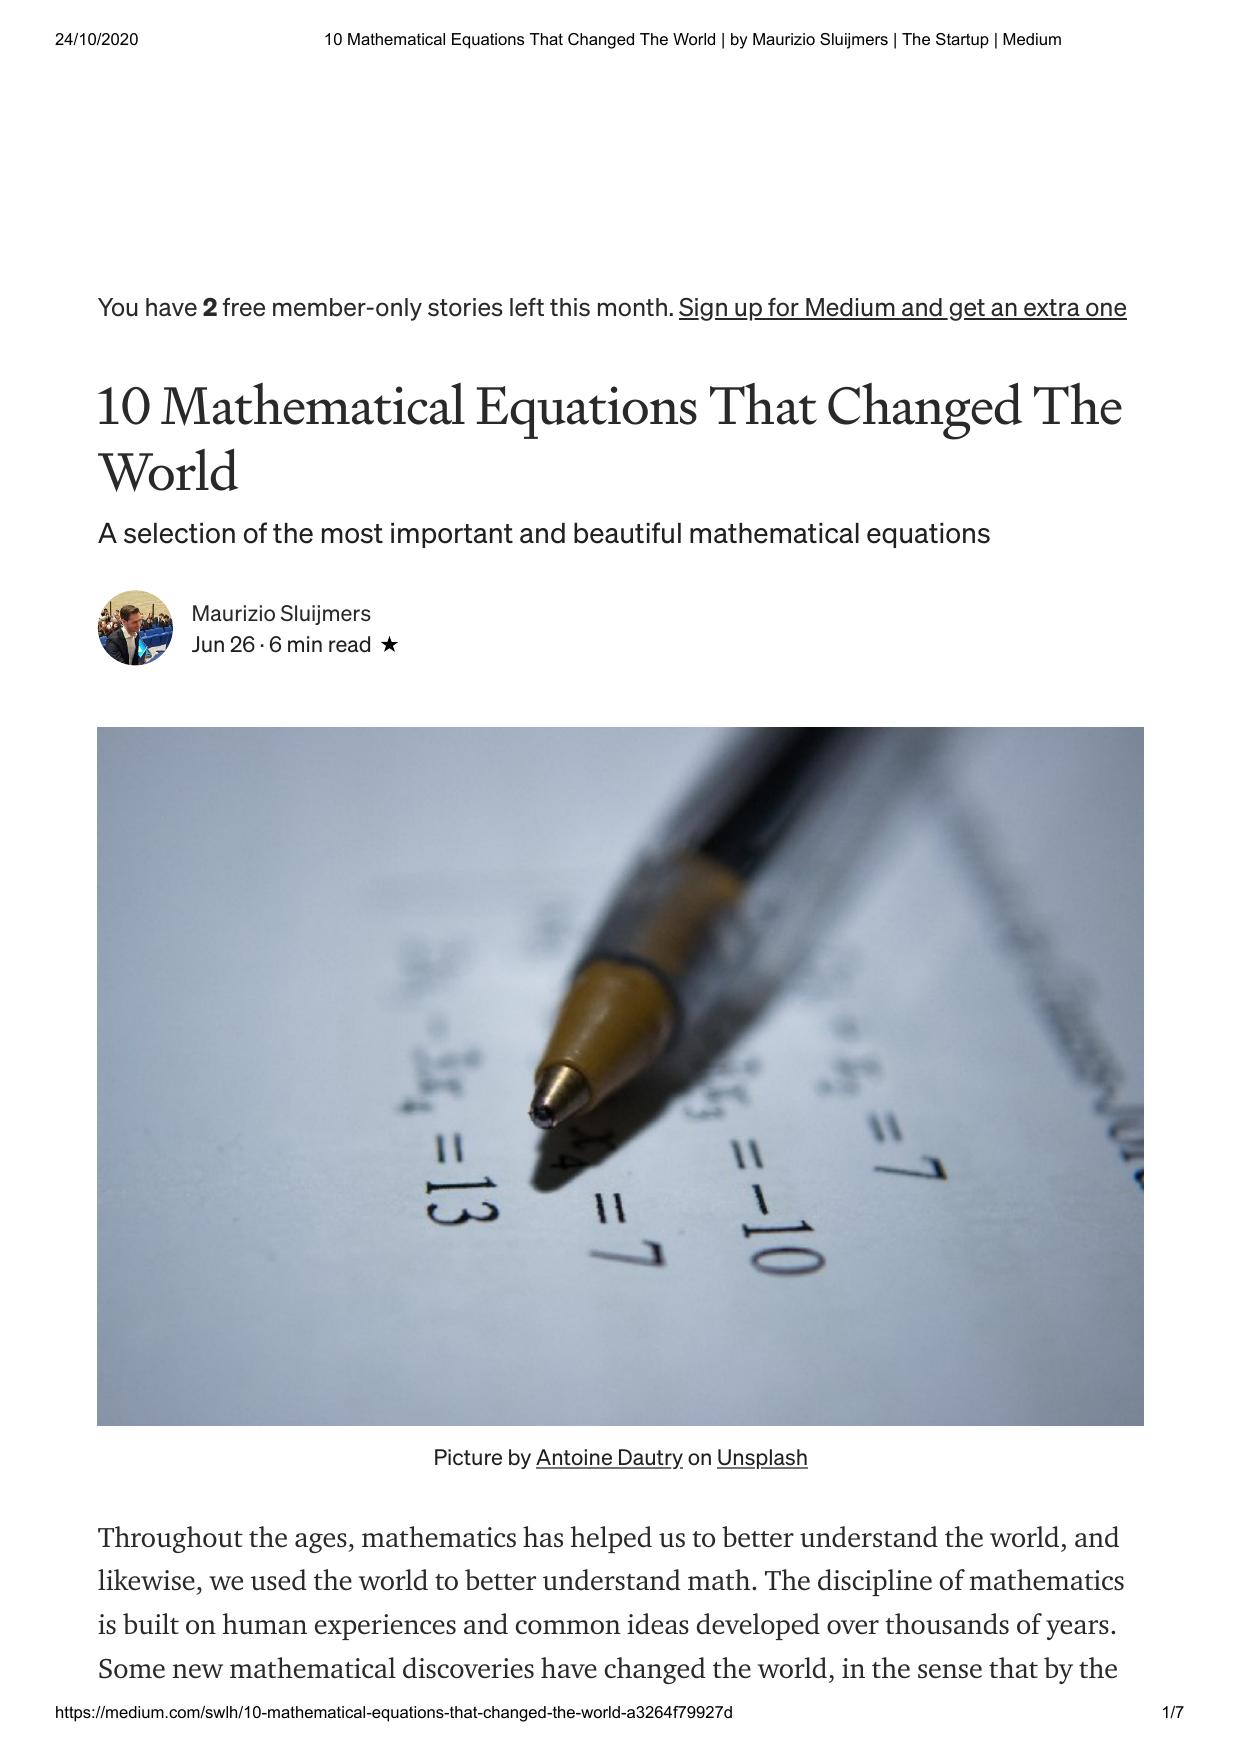 10 Mathematical Equations That Changed The World - Article